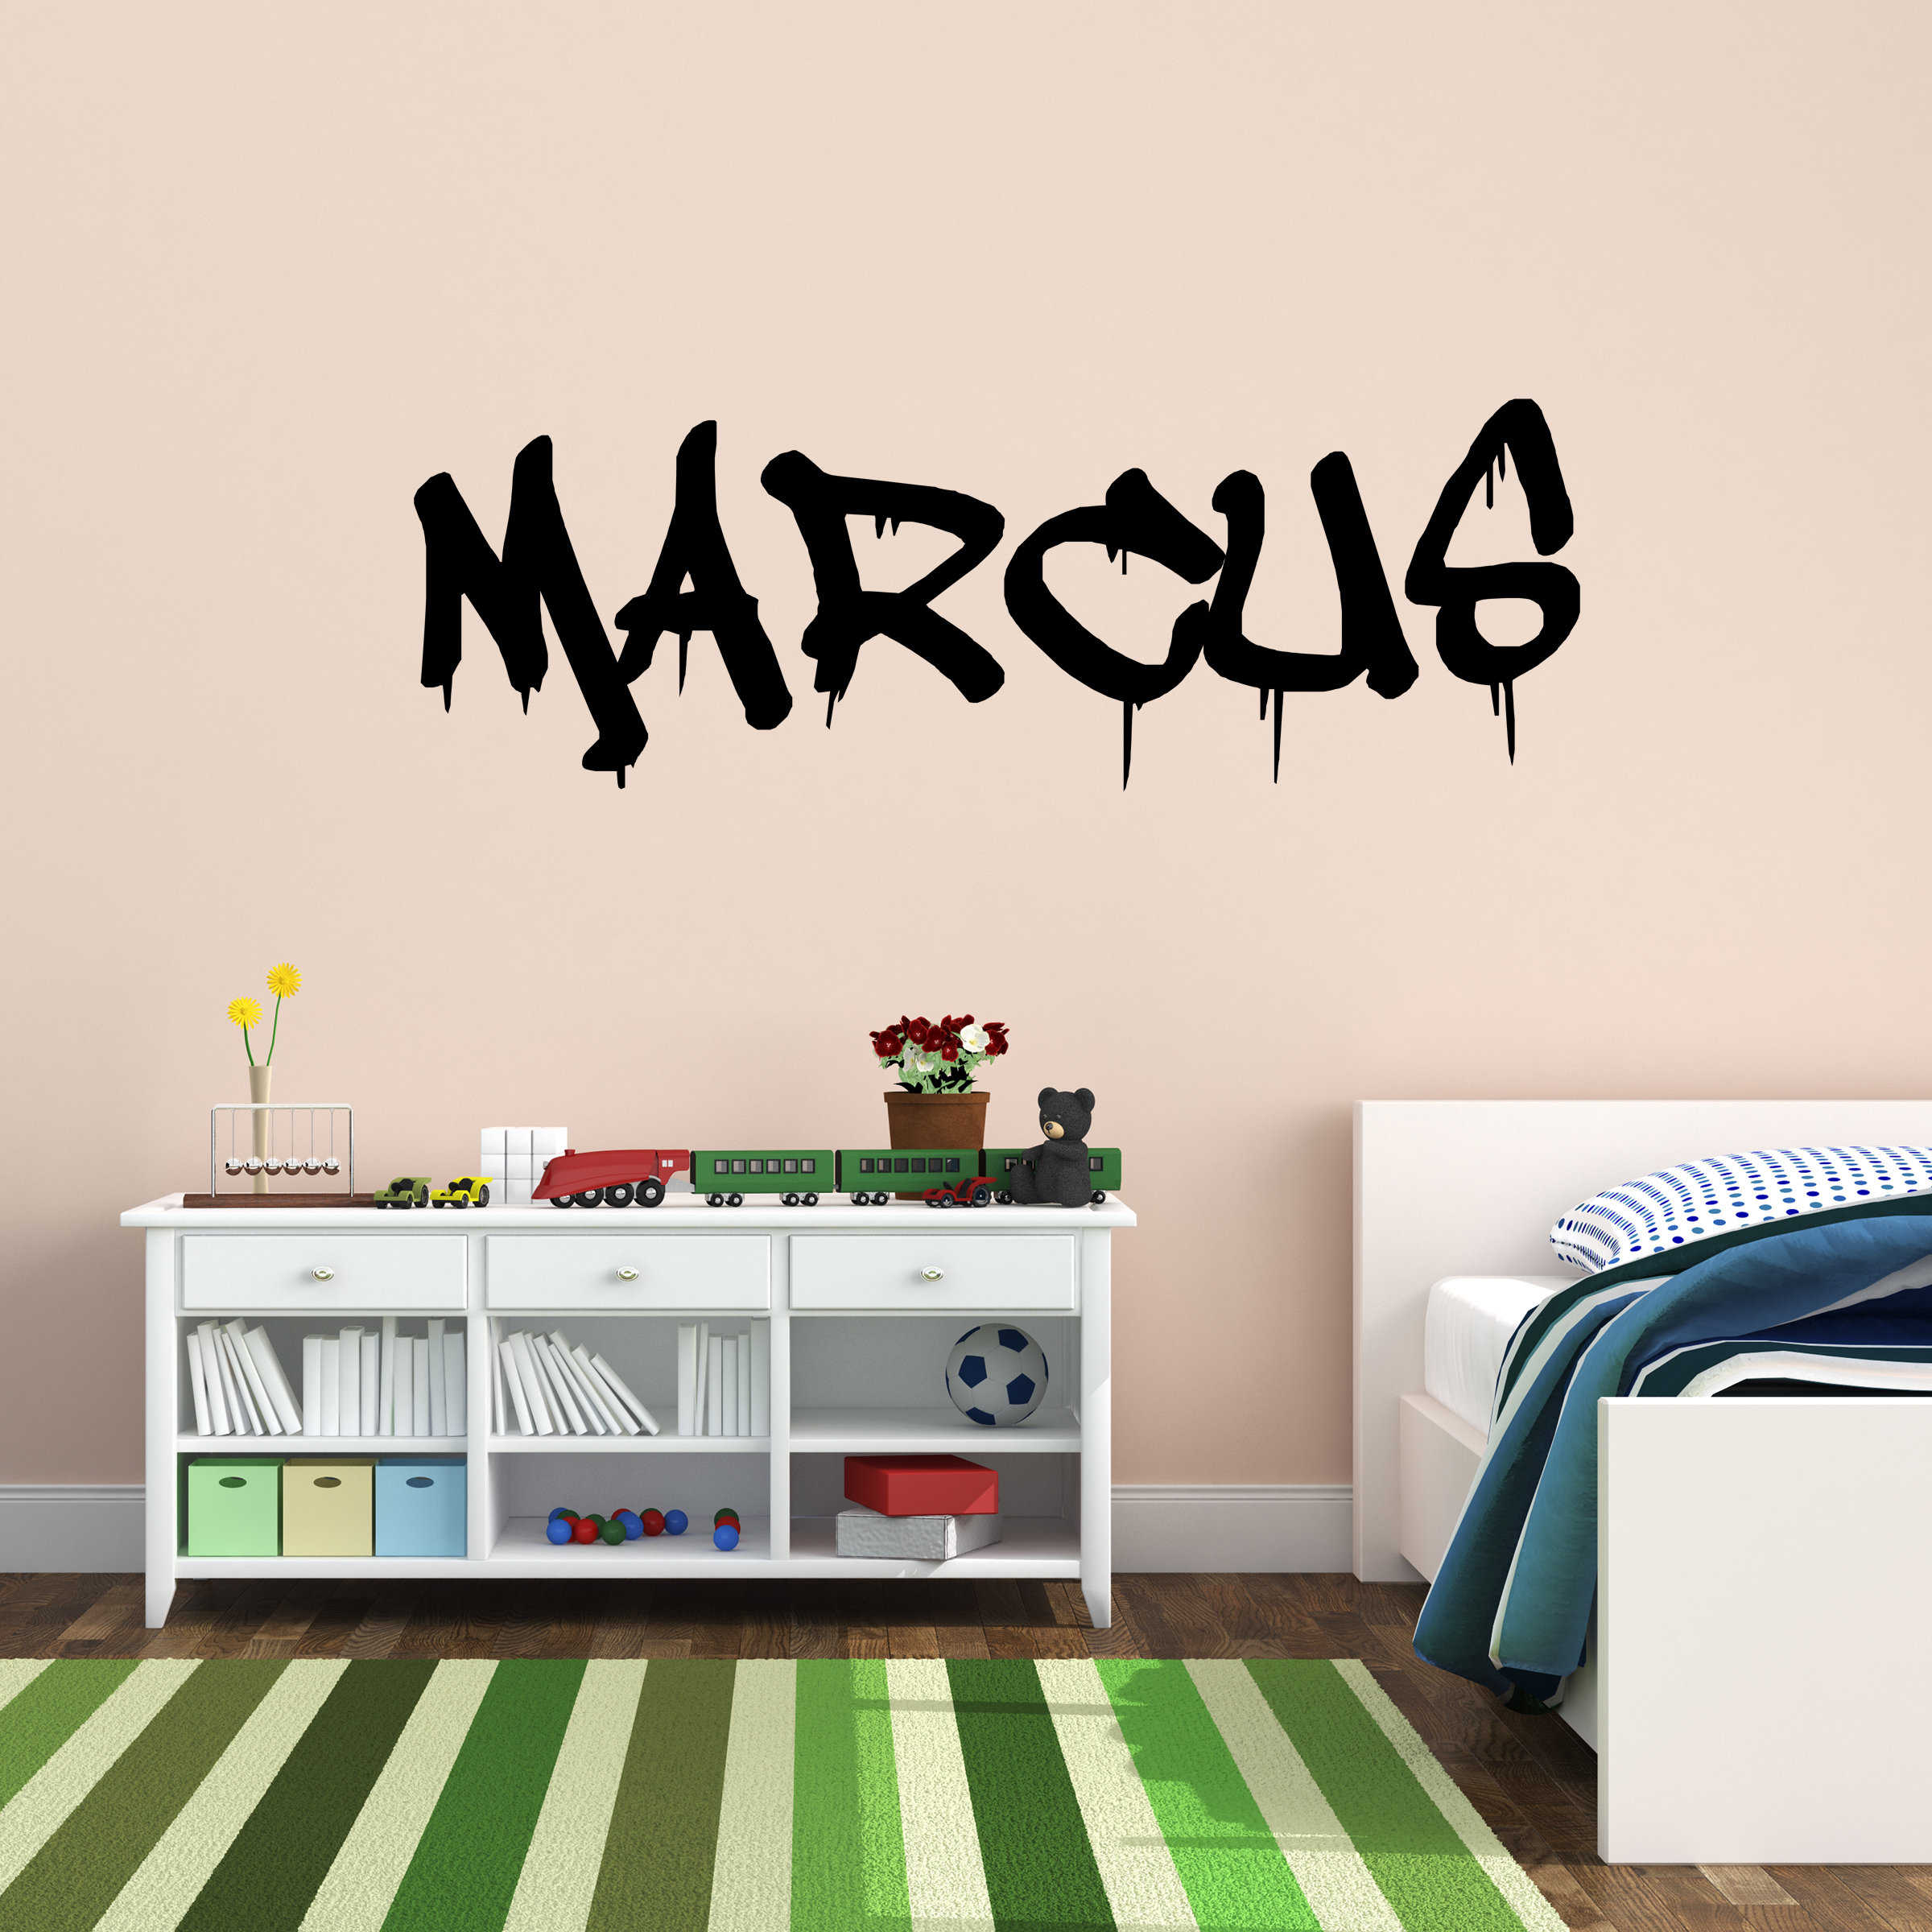 Design graffiti art name with character or logo wall decal